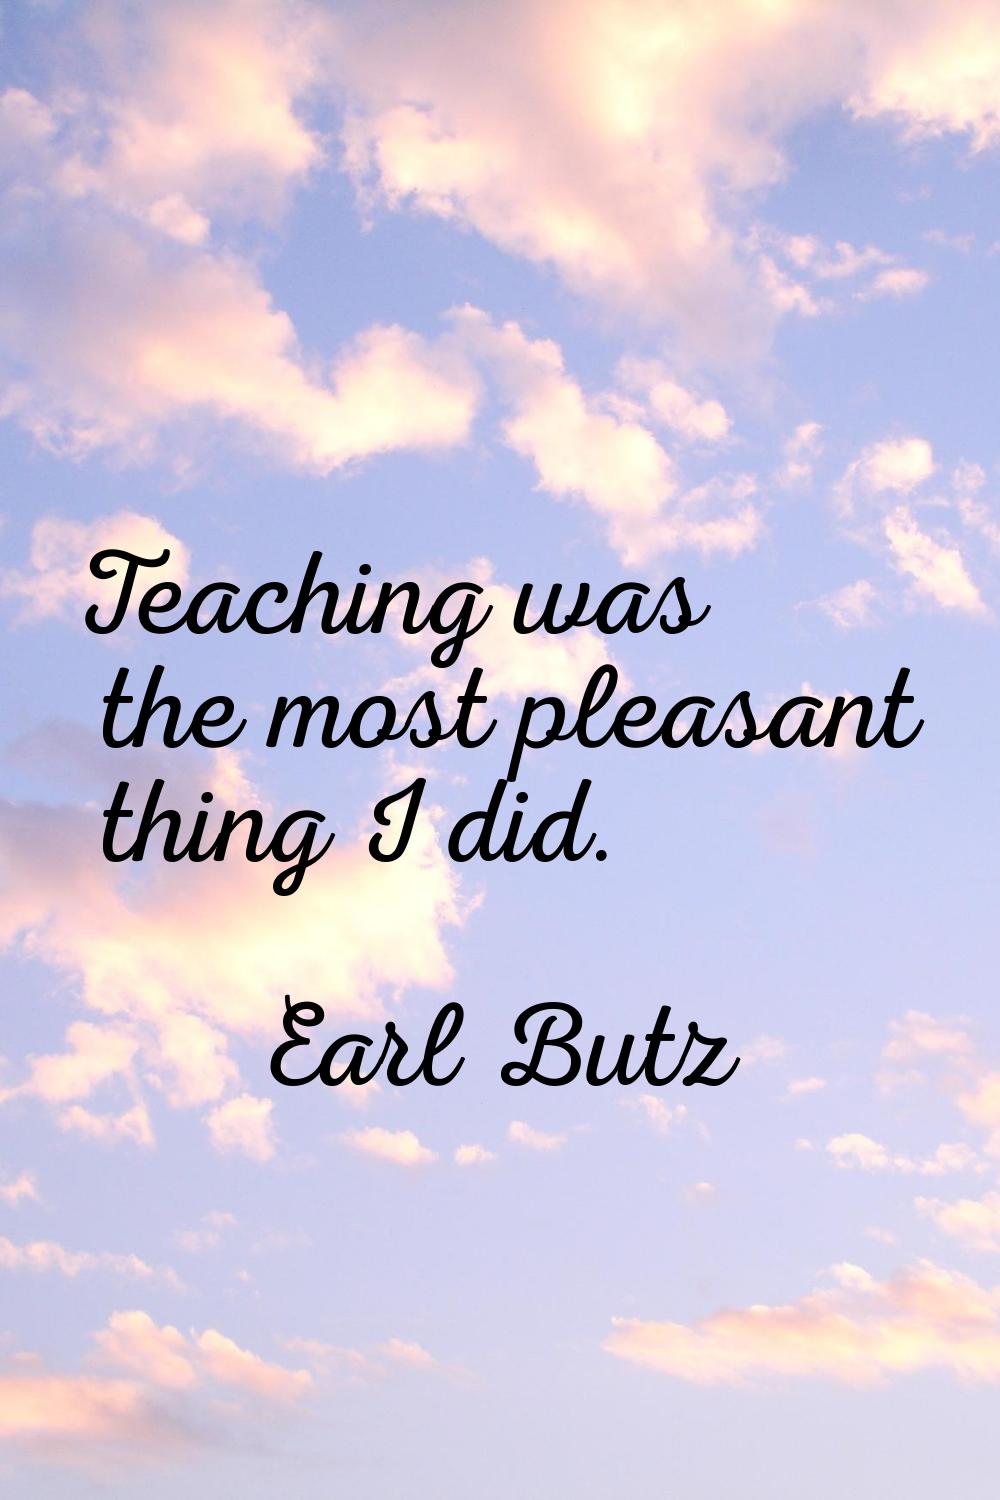 Teaching was the most pleasant thing I did.